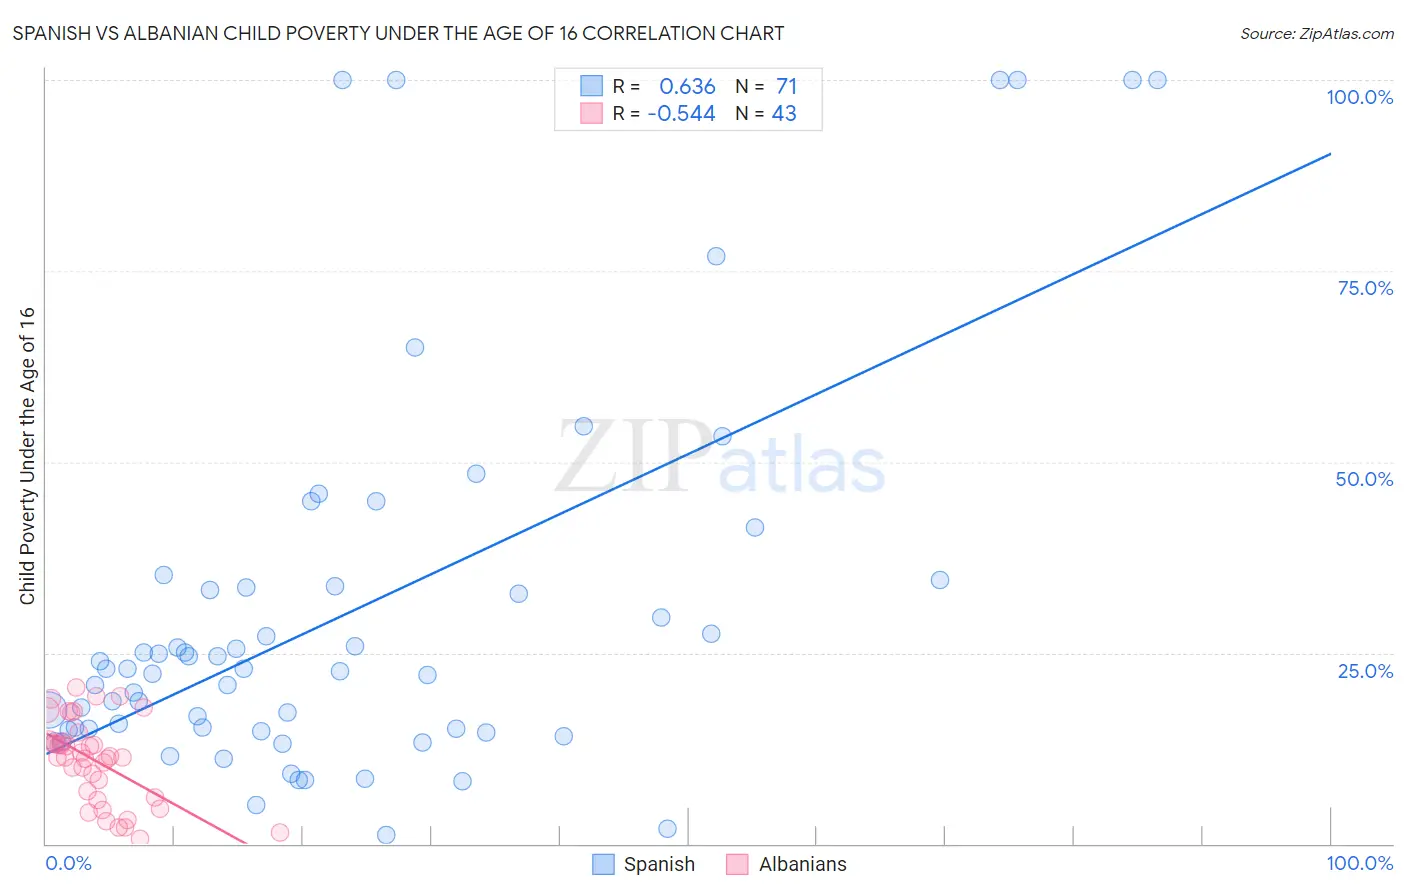 Spanish vs Albanian Child Poverty Under the Age of 16